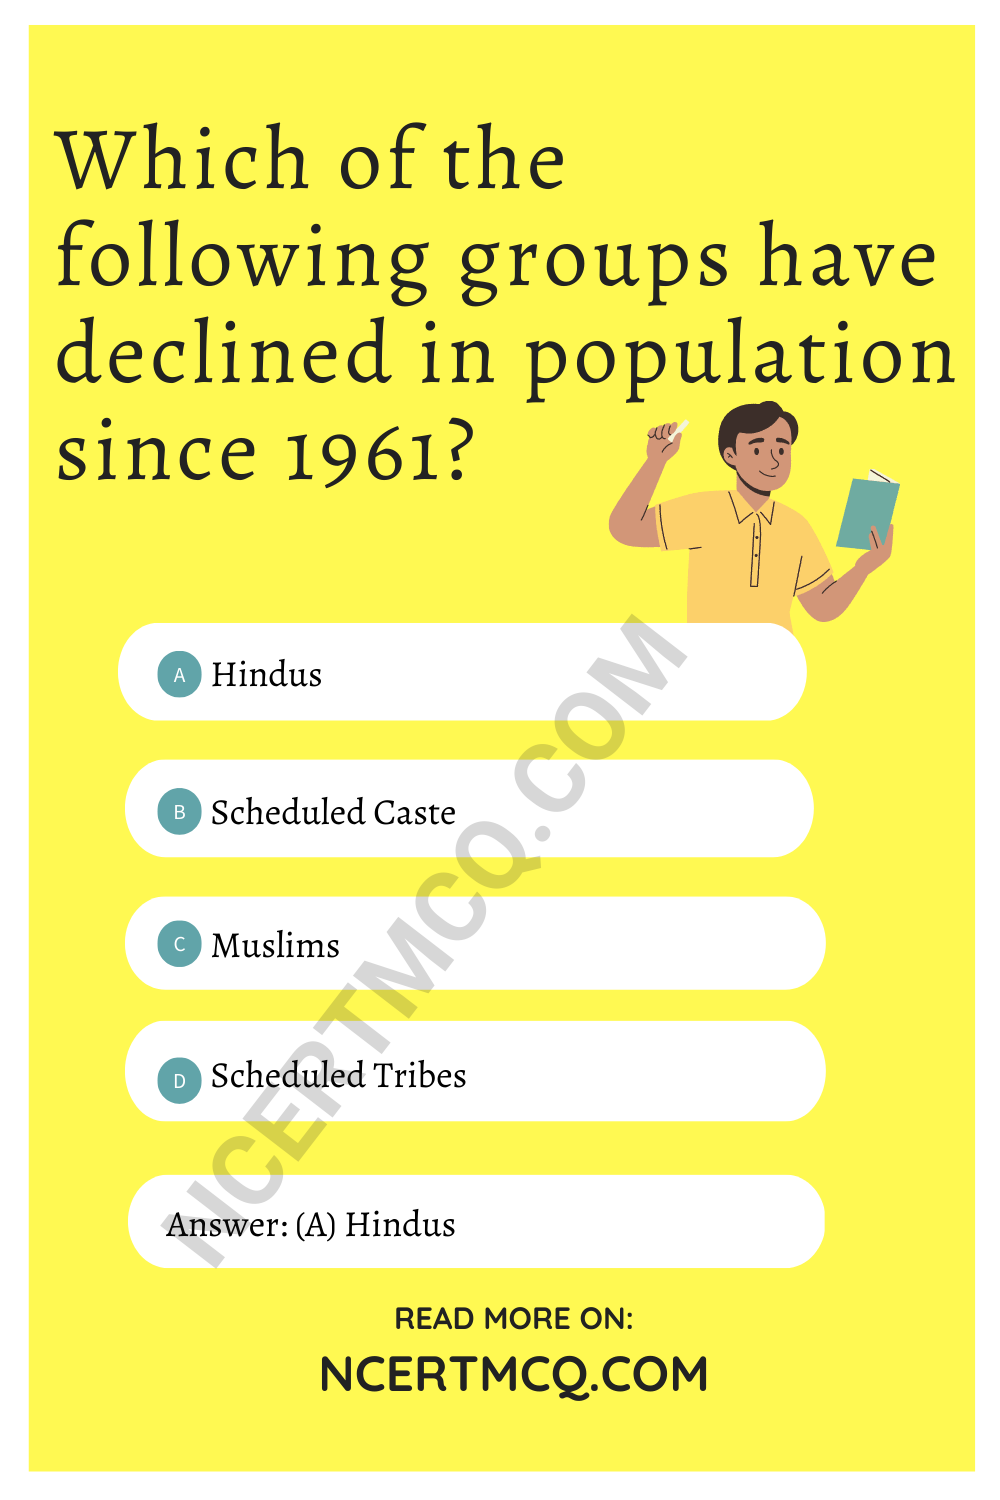 Which of the following groups have declined in population since 1961?